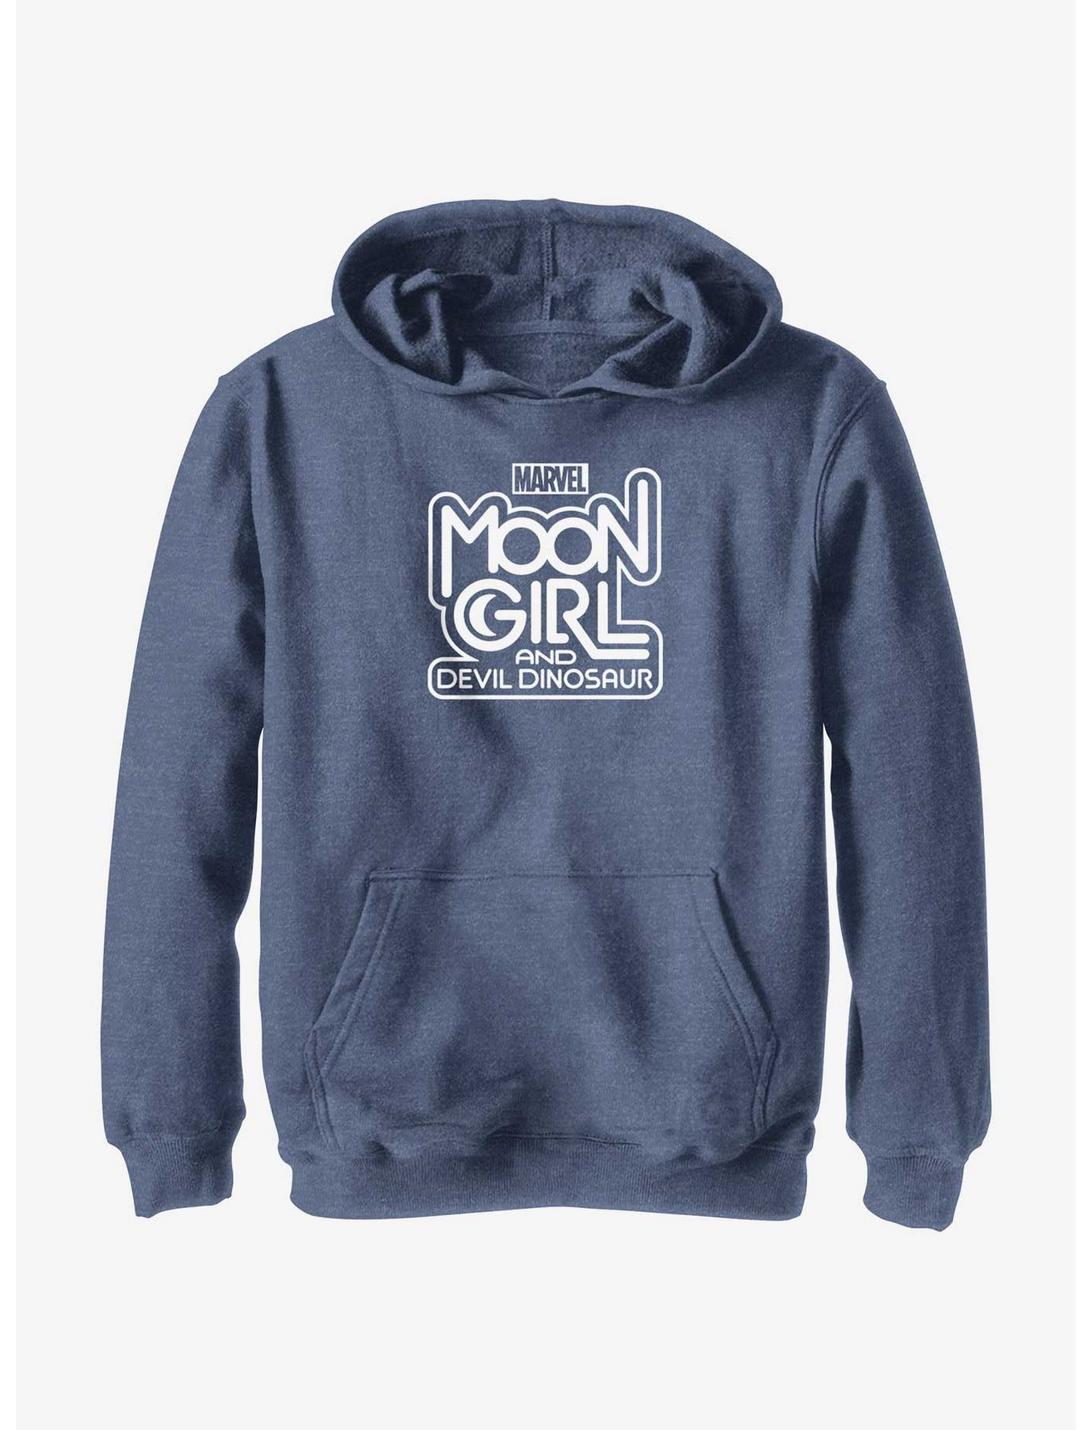 Marvel Moon Girl And Devil Dinosaur Moon Girl Title Youth Hoodie, NAVY HTR, hi-res